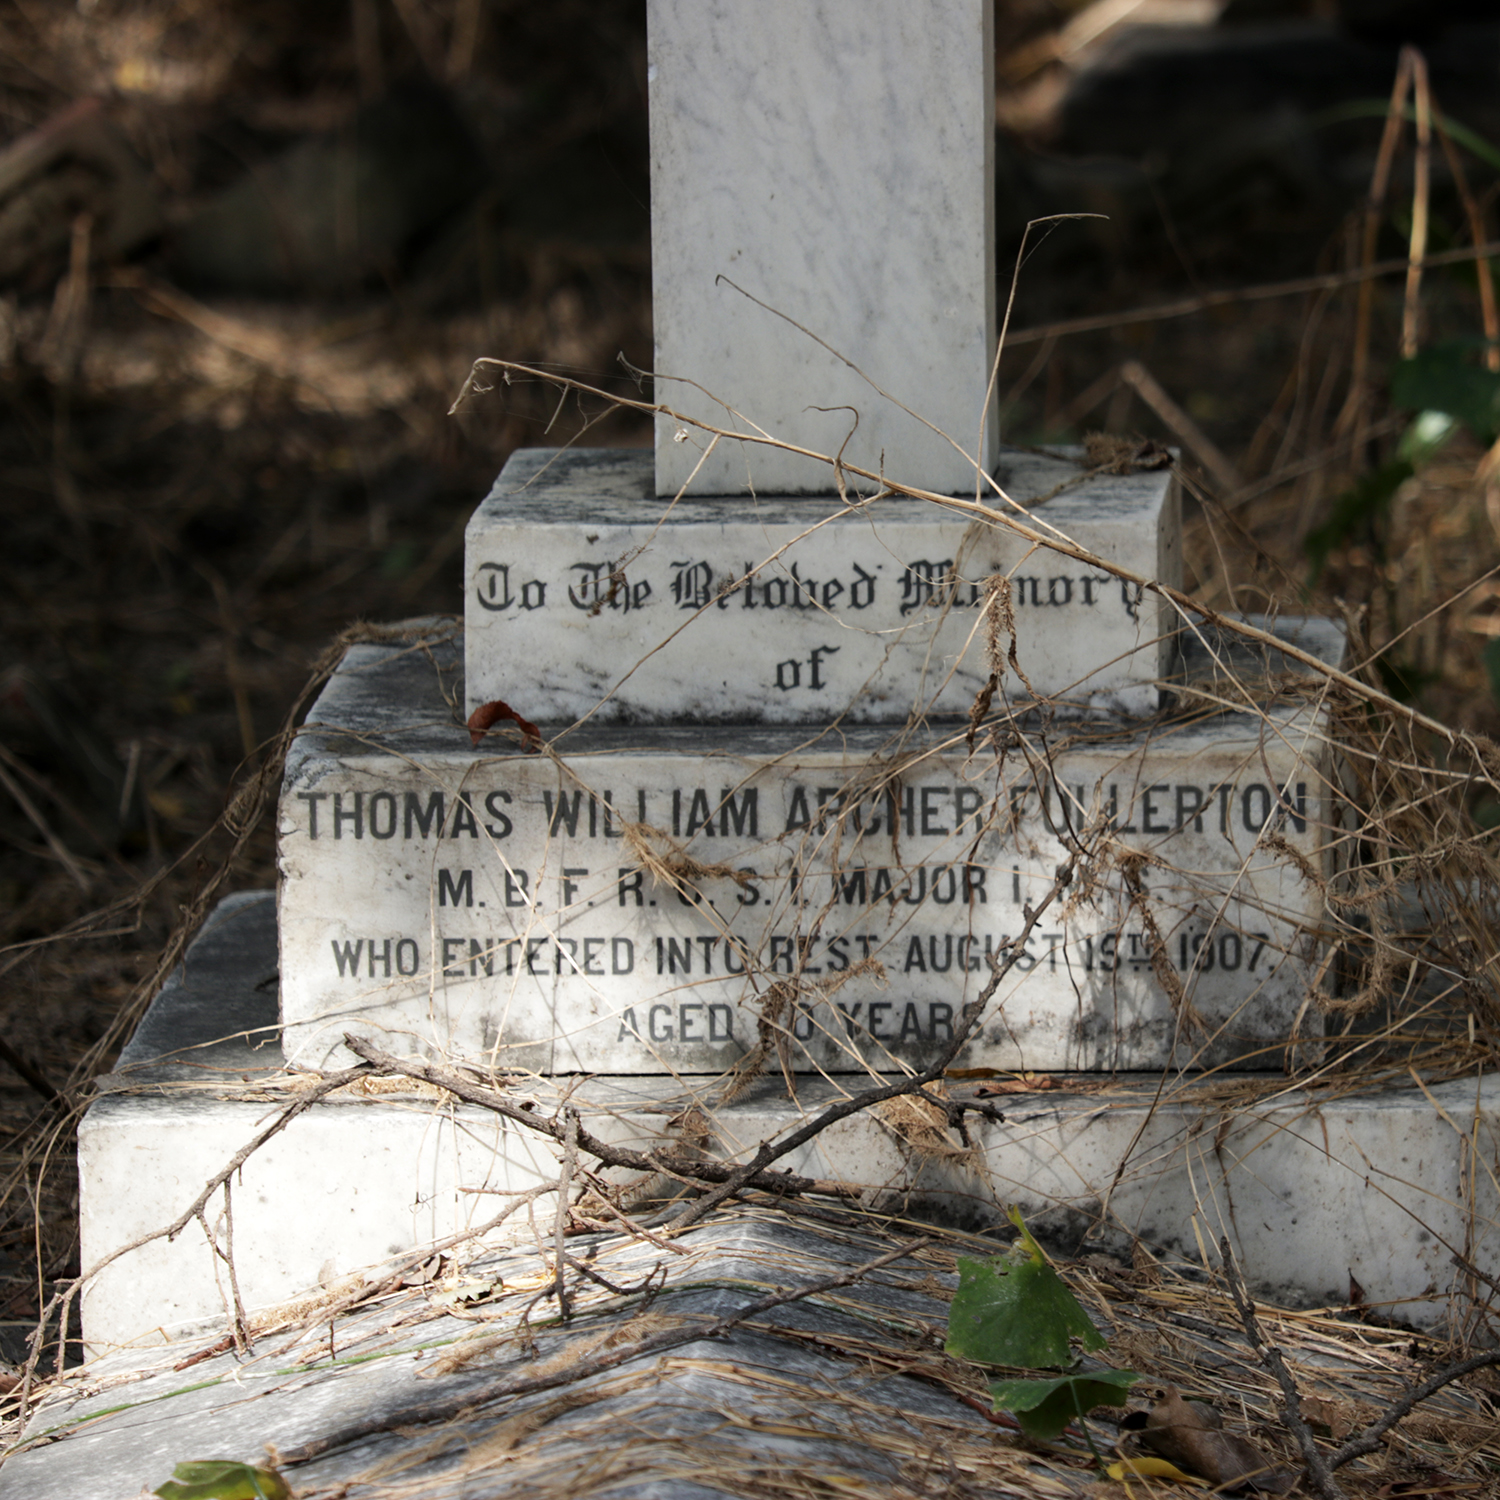 To The Beloved Memory of Thomas William Archer Fullerton